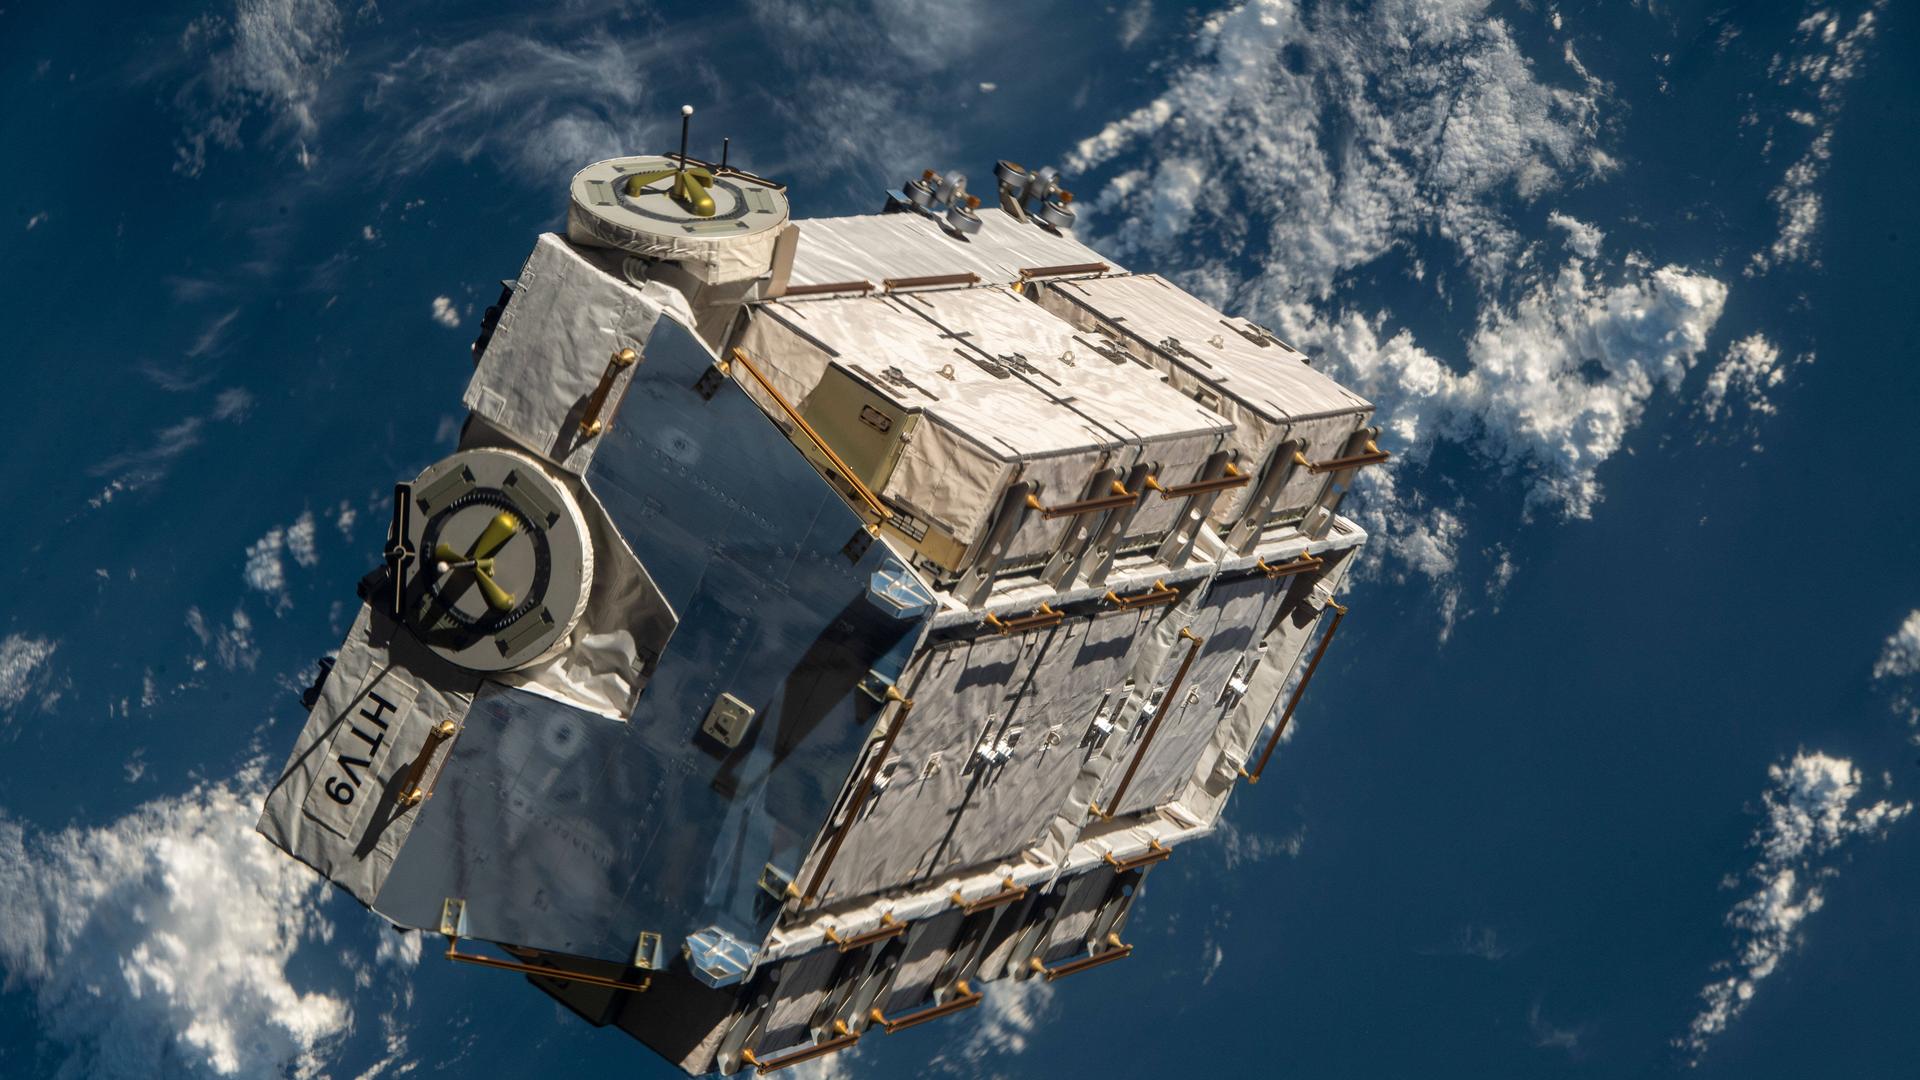 March 11, 2021 - Earth Atmosphere - An external pallet packed with old nickel-hydrogen batteries is pictured shortly after mission controllers in Houston commanded the Canadarm2 robotic arm to release it into space. The International Space Station was orbiting 260 miles above the Pacific Ocean west of central America at the time this photograph was taken. The external pallet will orbit Earth between two to four years before burning up harmlessly in the atmosphere. The batteries were removed during previous spacewalks and replaced with newer lithium-ion batteries to continue powering the station s systems. Earth Atmosphere - ZUMAz03_ 20210311_sha_z03_194 Copyright: xNASAx 